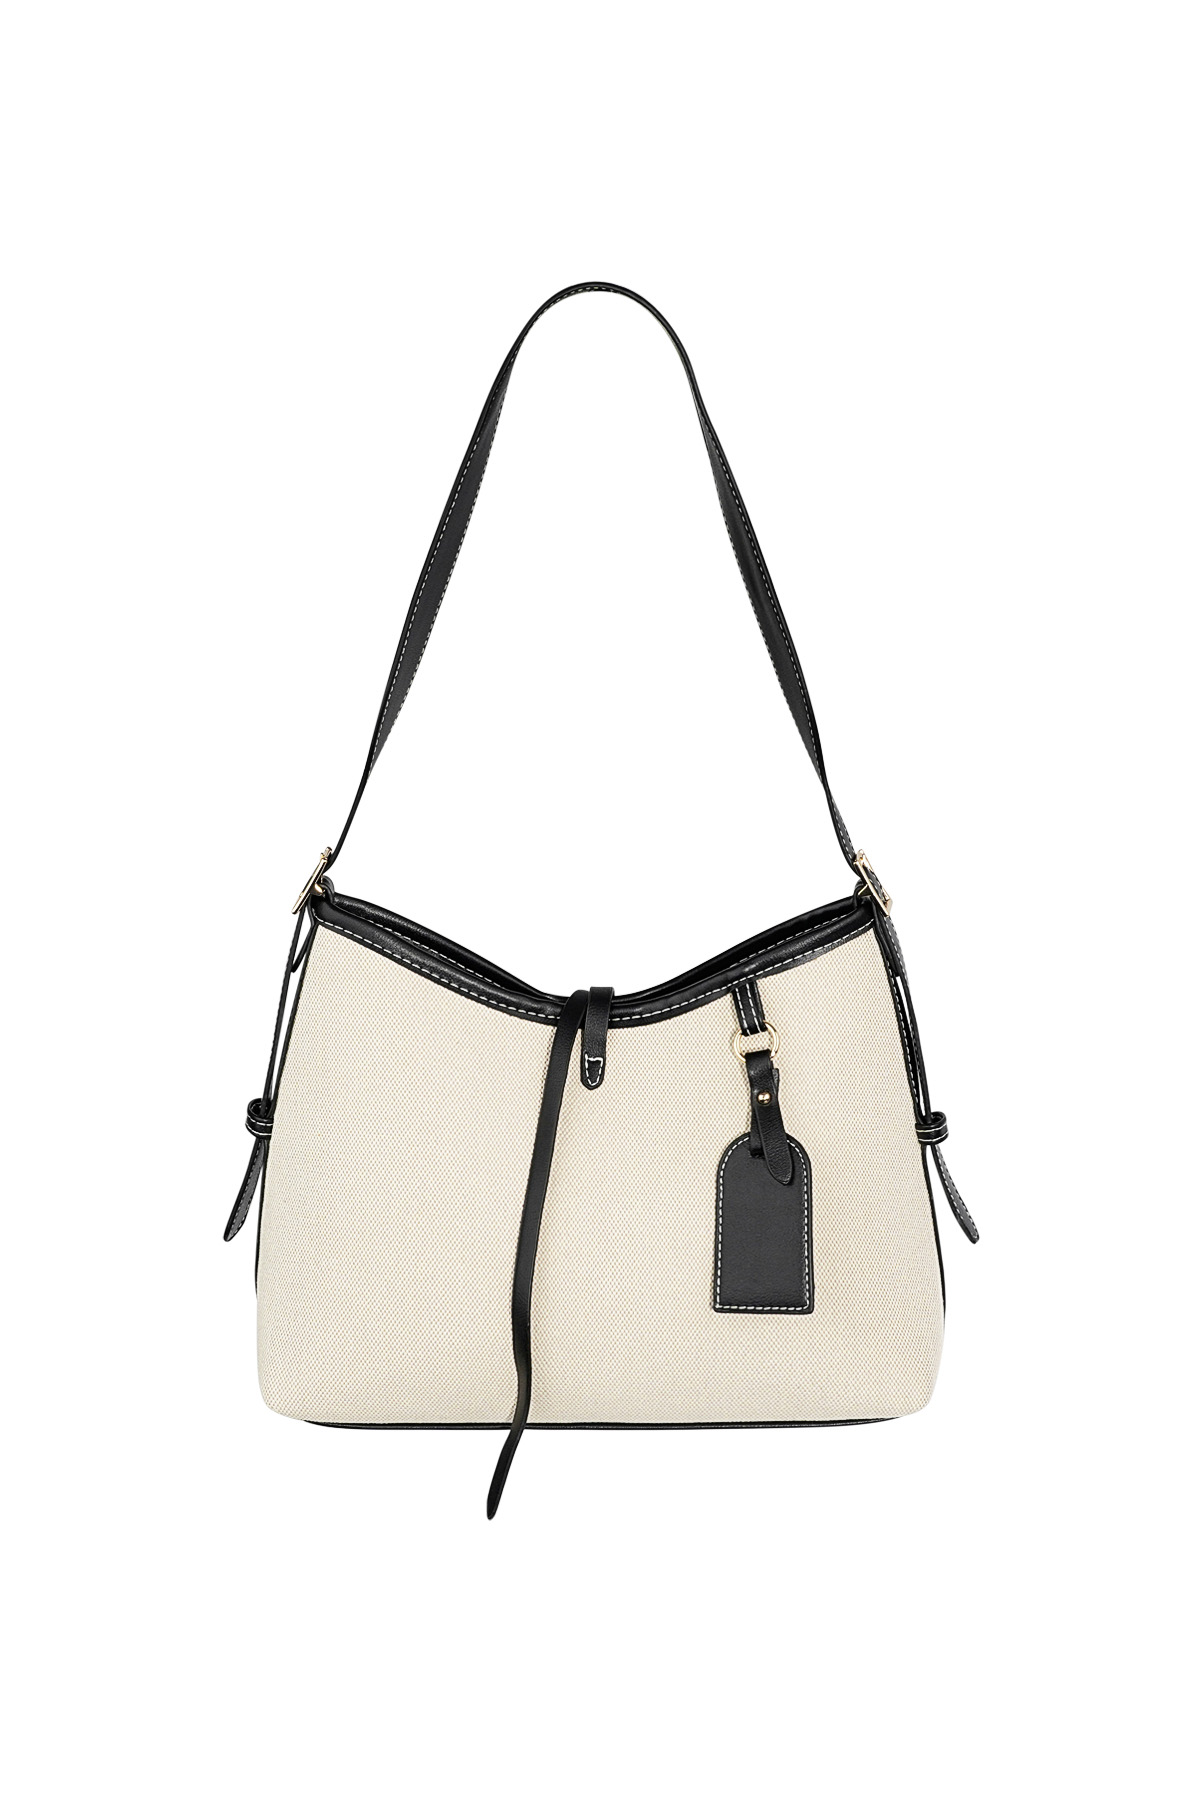 Chic bag with adjustable strap - black and white